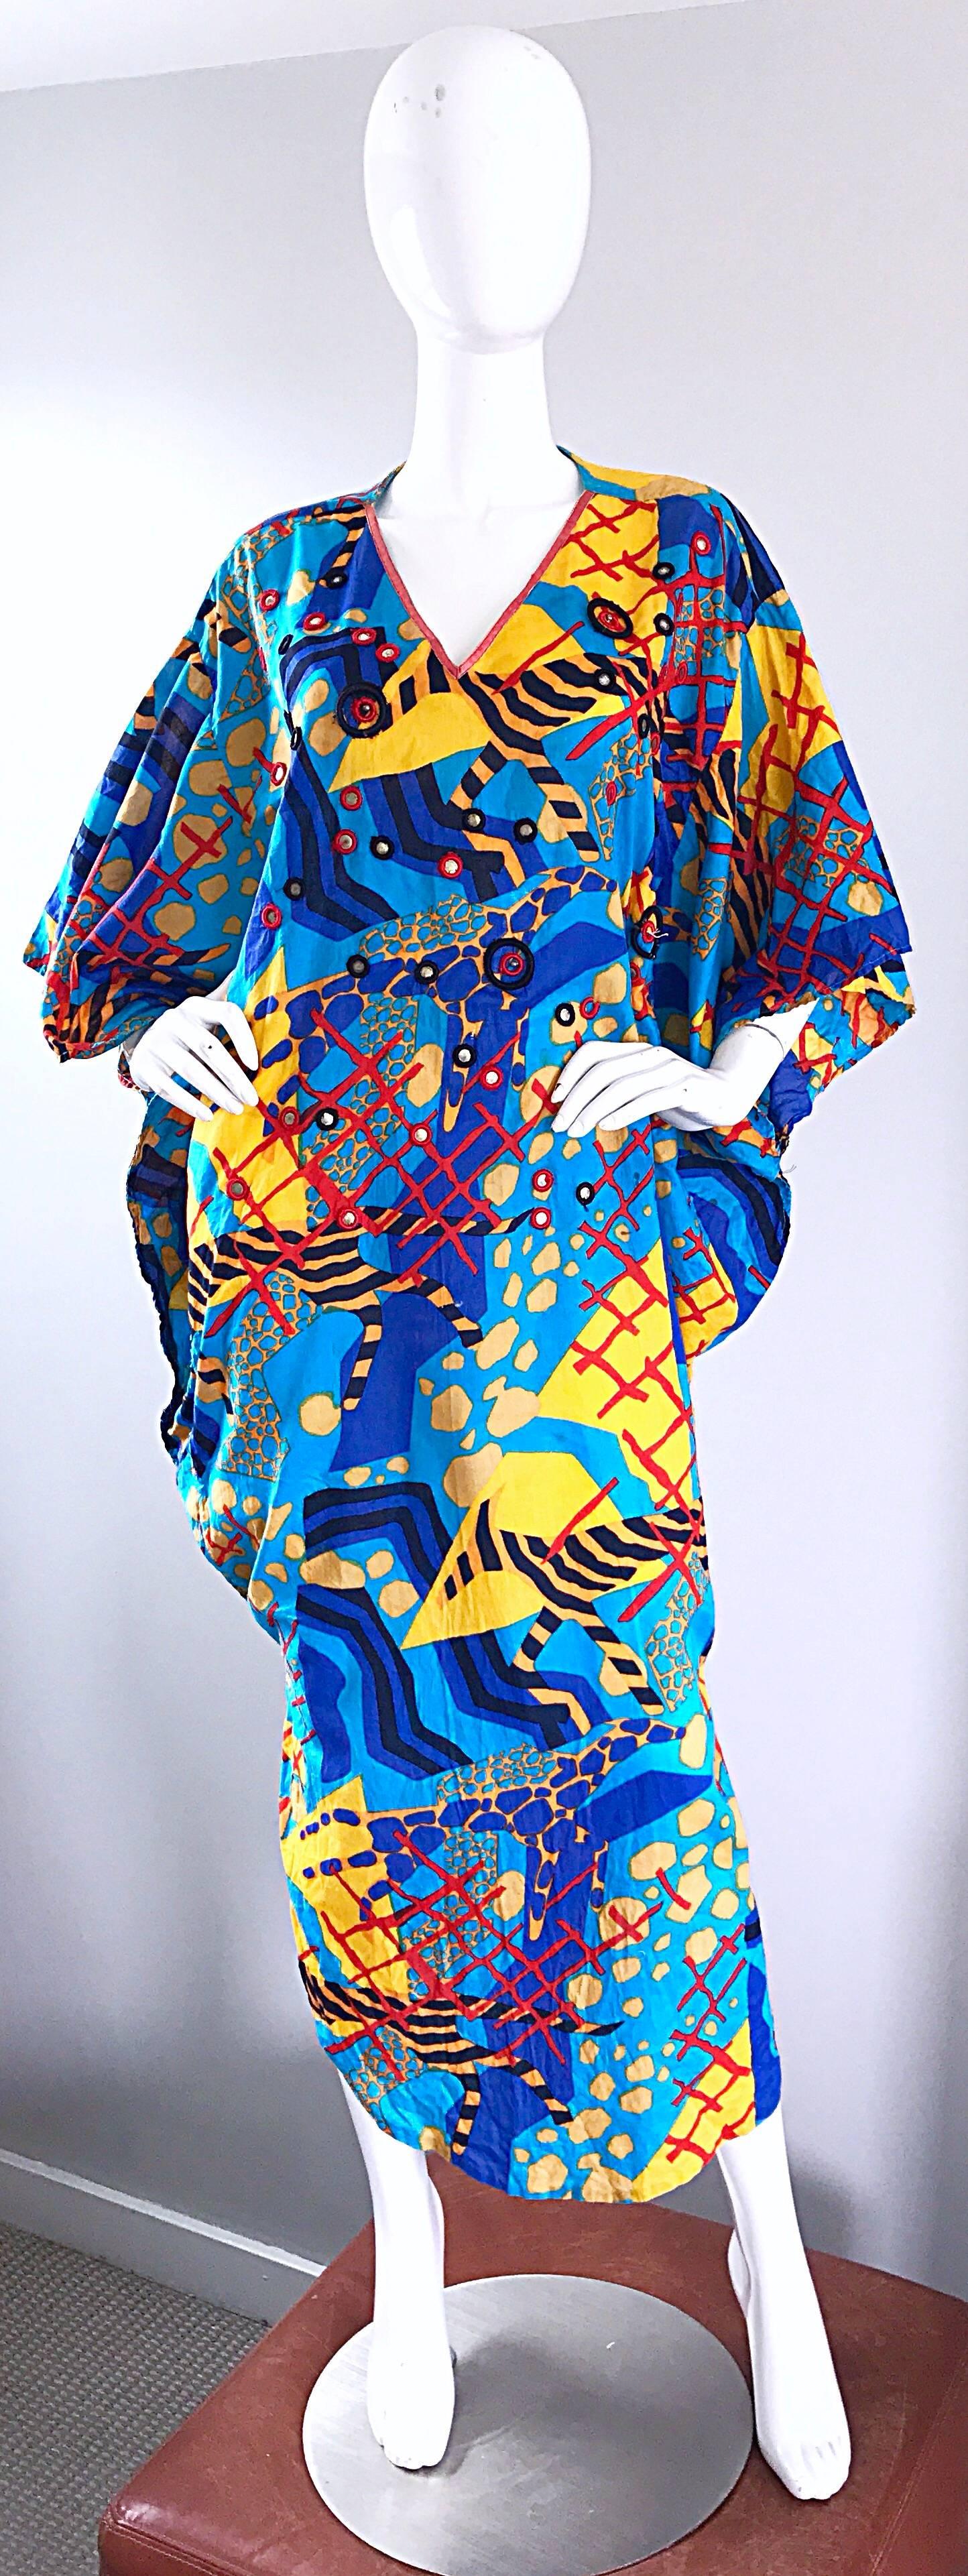 Incredible vintage JUDITH ANN for NEIMAN MARCUS mirror embellished cotton kaftan maxi dress! Features vibrant colors of blue, red, marigold yellow, and black throughout. Mirrored beads hand-sewn throughout. Simply slip this beauty over your head,